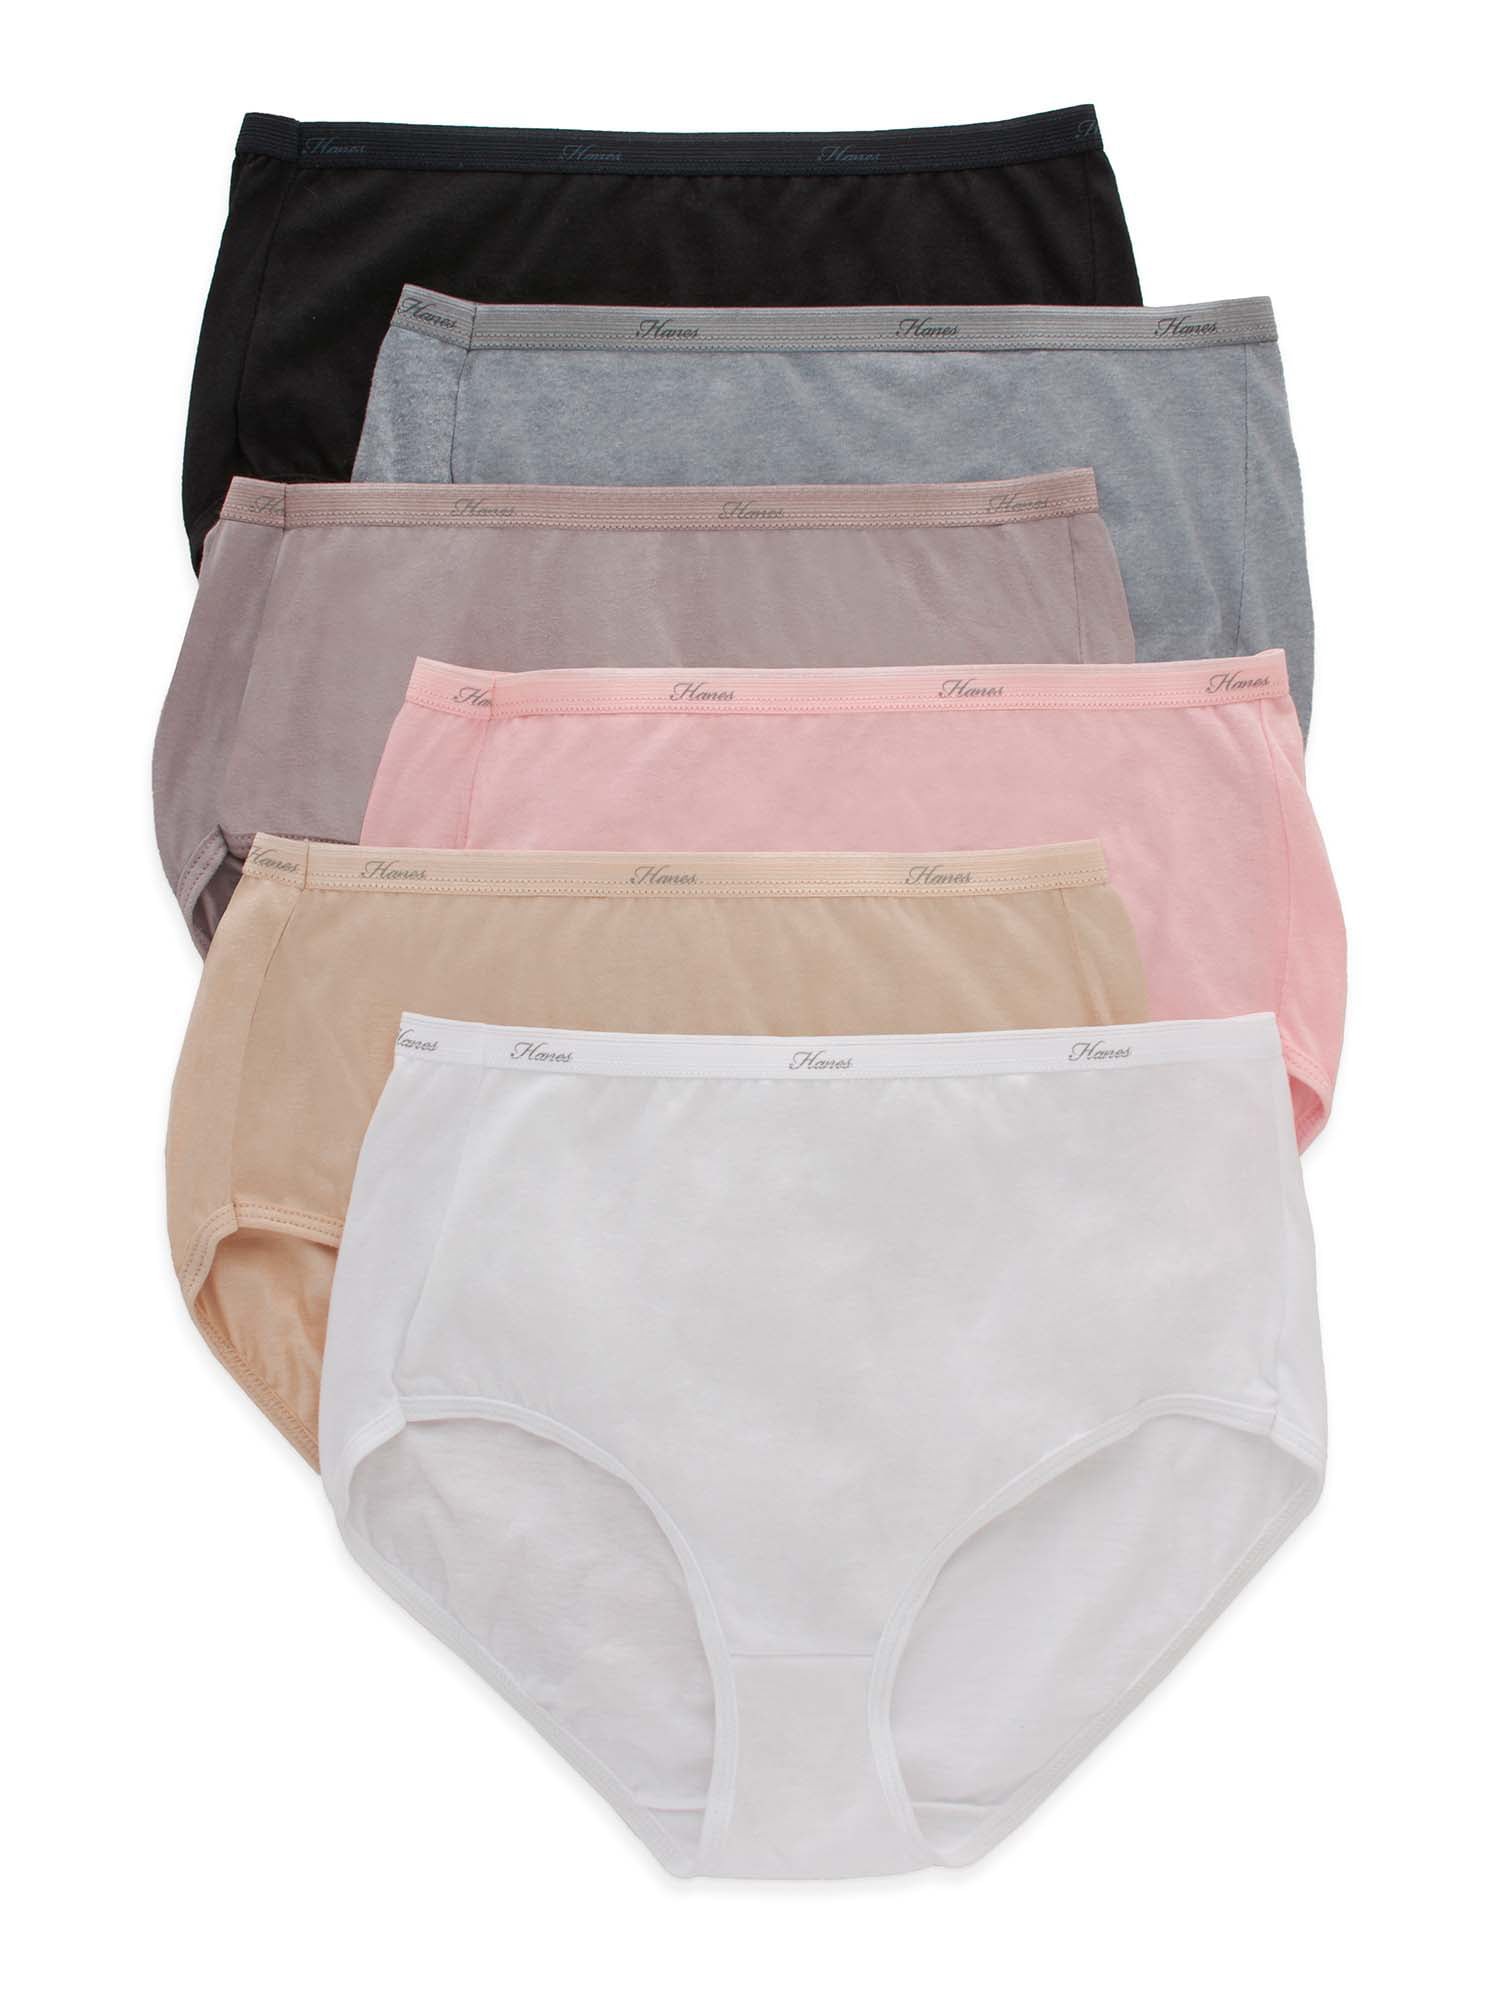 Hanes Women's Panties Pack, Smoothing Microfiber No-Show Underwear, 6-Pack  (Colo